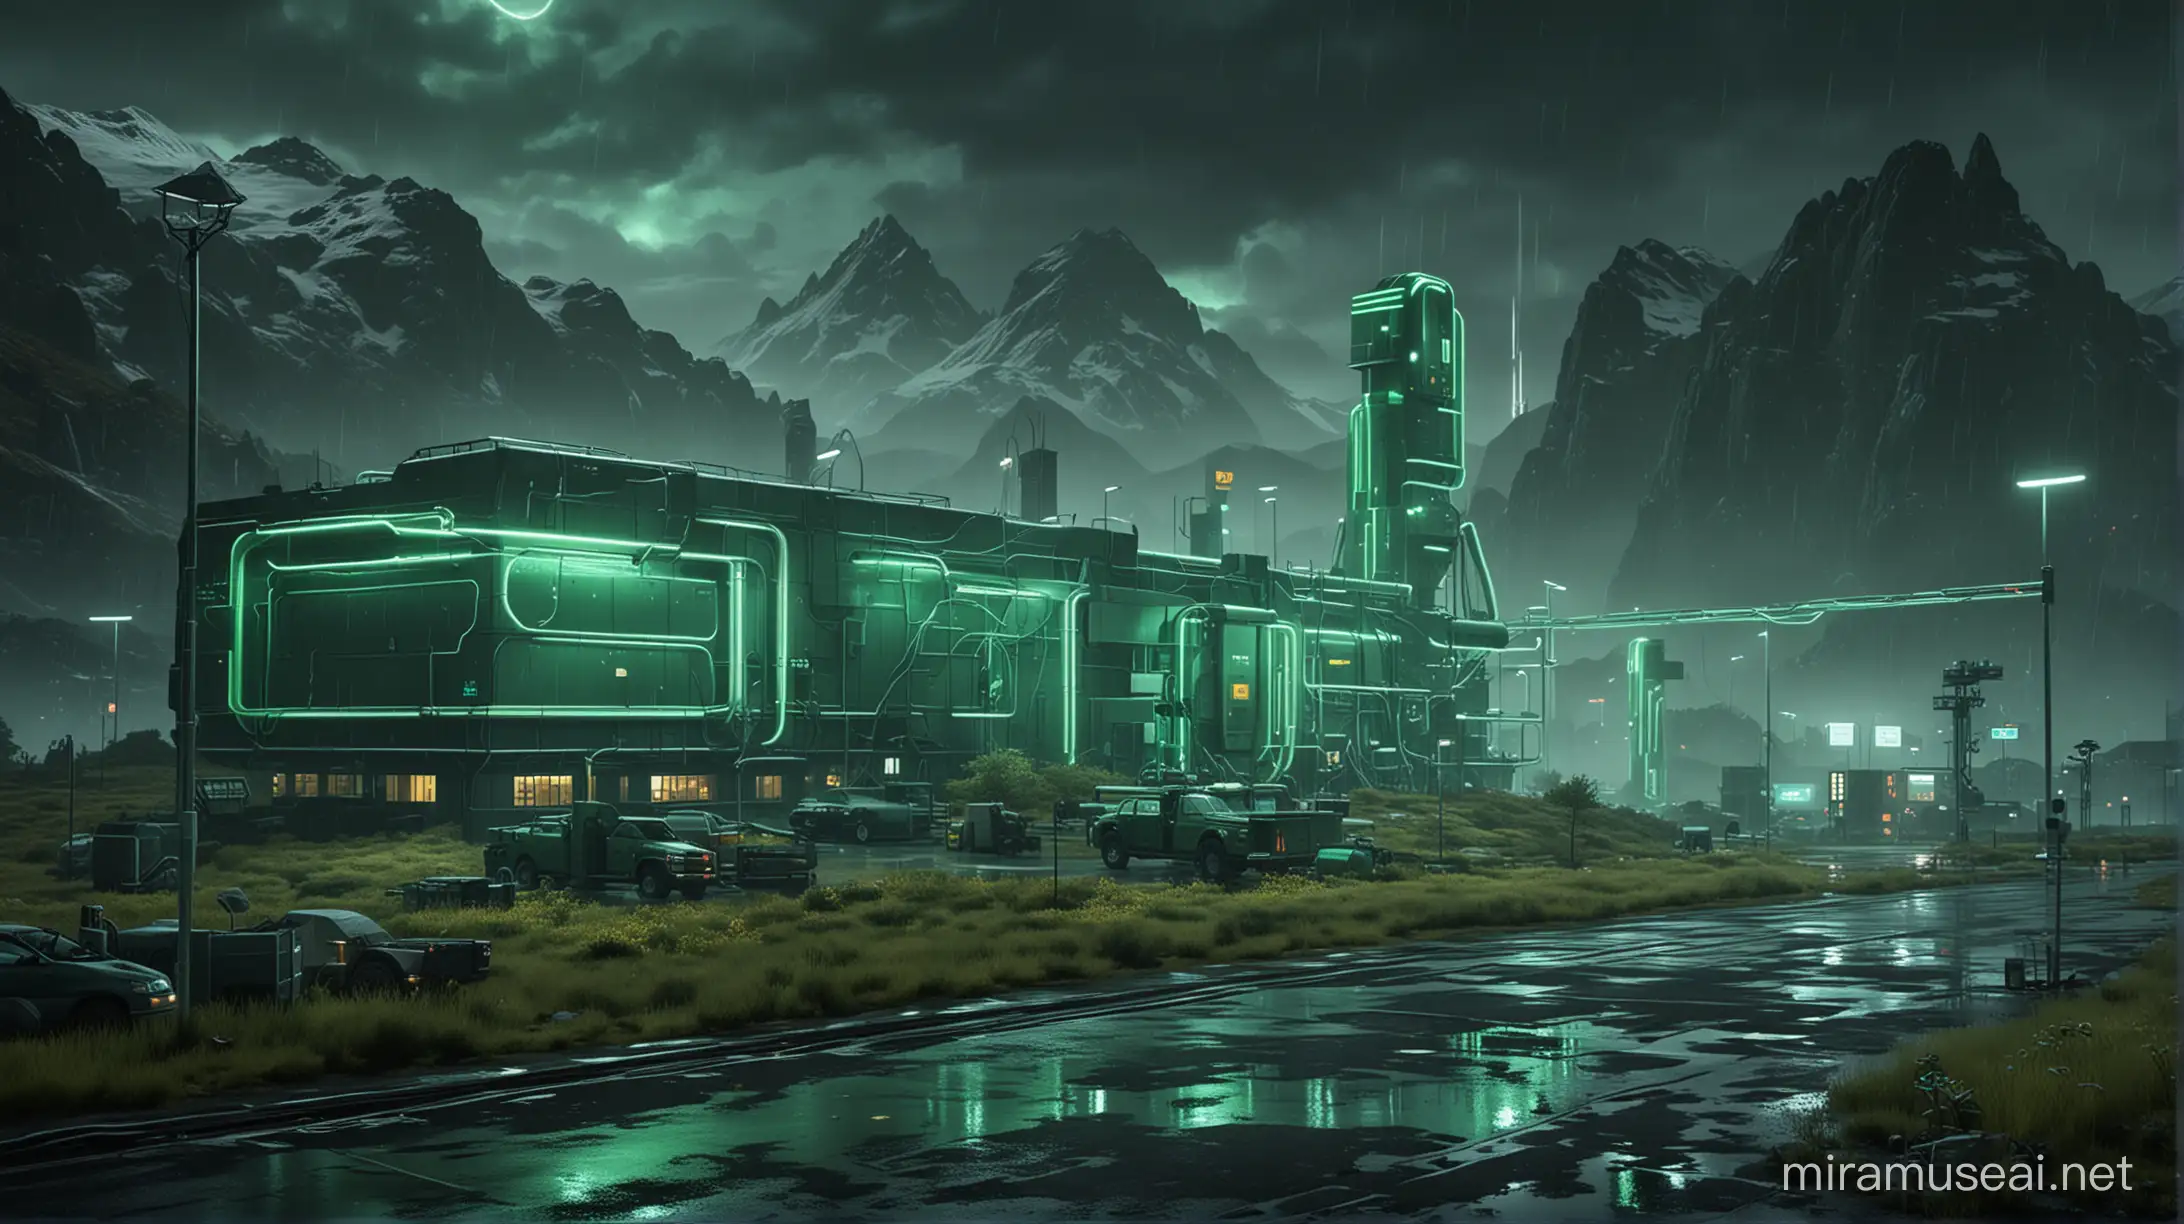 Realistic research centers with one worker around it, green neon and huge neon lights inside the part, its color shadow on the floor, Rainy weather, staff in dark green uniforms and helmets, Atmospheric and cinematic, The huge structures, A dark green smoke rose from the research centers environment and spread in the air, The image space is outside the realistic research center.
with huge satellite antennas,
A huge cubic green neon object,
in the Realistic mountains.
atmospheric and cinematic.
All overall dark green image theme.
Very big lights and lots of green neon lights.
The neon lights in the image should be very bright throughout the image.
The neon lights in the picture should be very bright in the dark
The neon lights in the picture should be very bright.
Very large and bright neon lamps in the structure.
Shades of green throughout the image.
3D.
Several large advanced and strange buildings nearby.